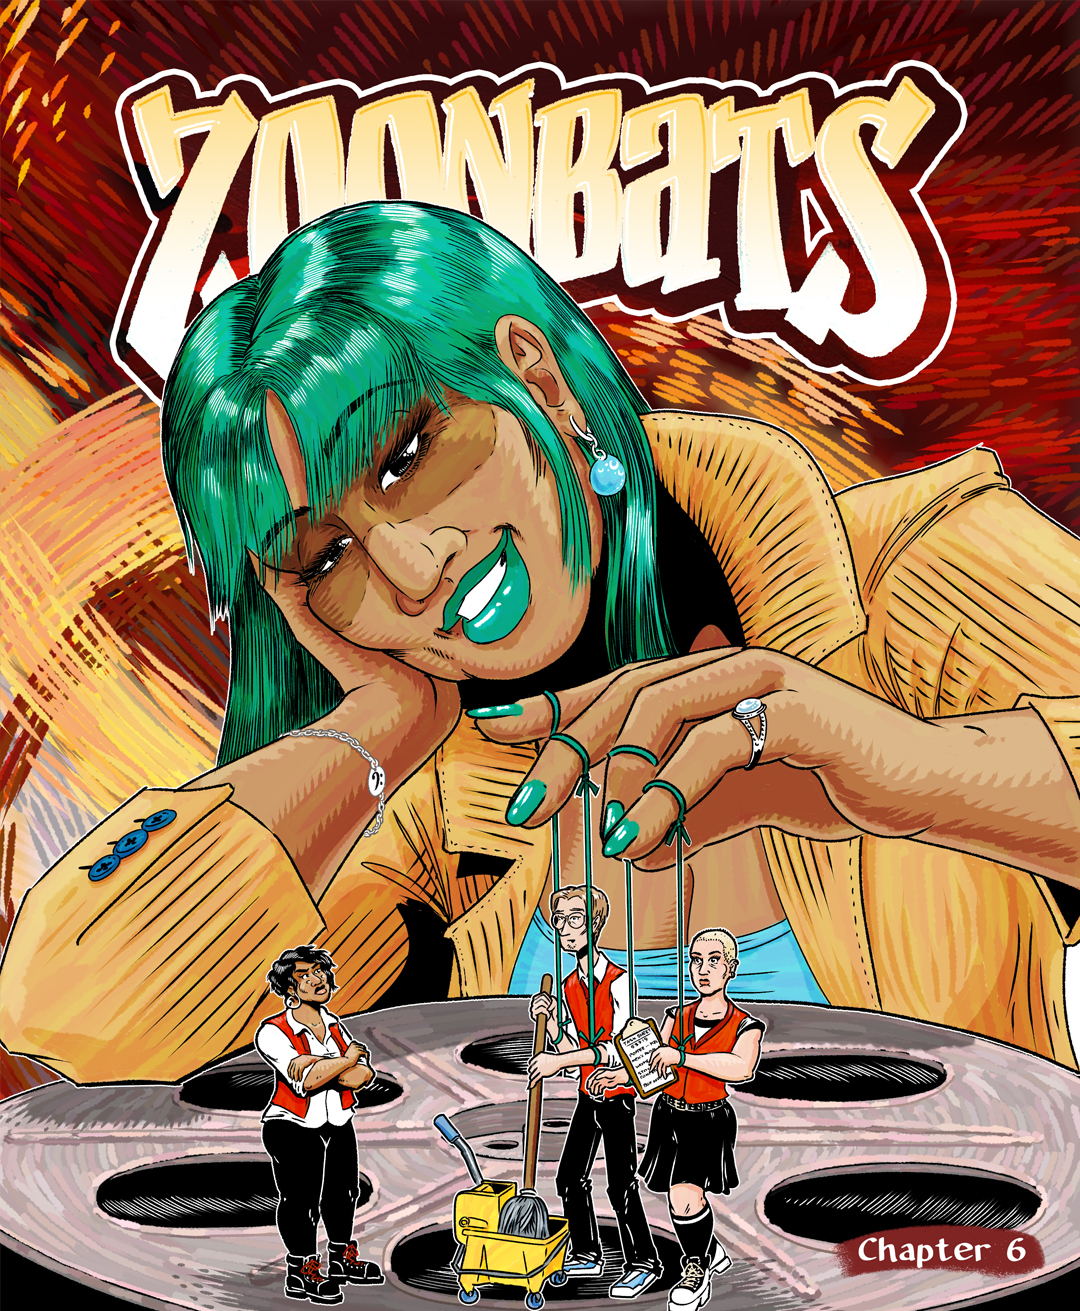 A thumbnail image of the cover of Chapter 6, depicting the Kel Cole smiling serenely as she uses marionette strings to manipulate miniature versions of her co-workers Esan and Yura while Bloom looks up disapprovingly.